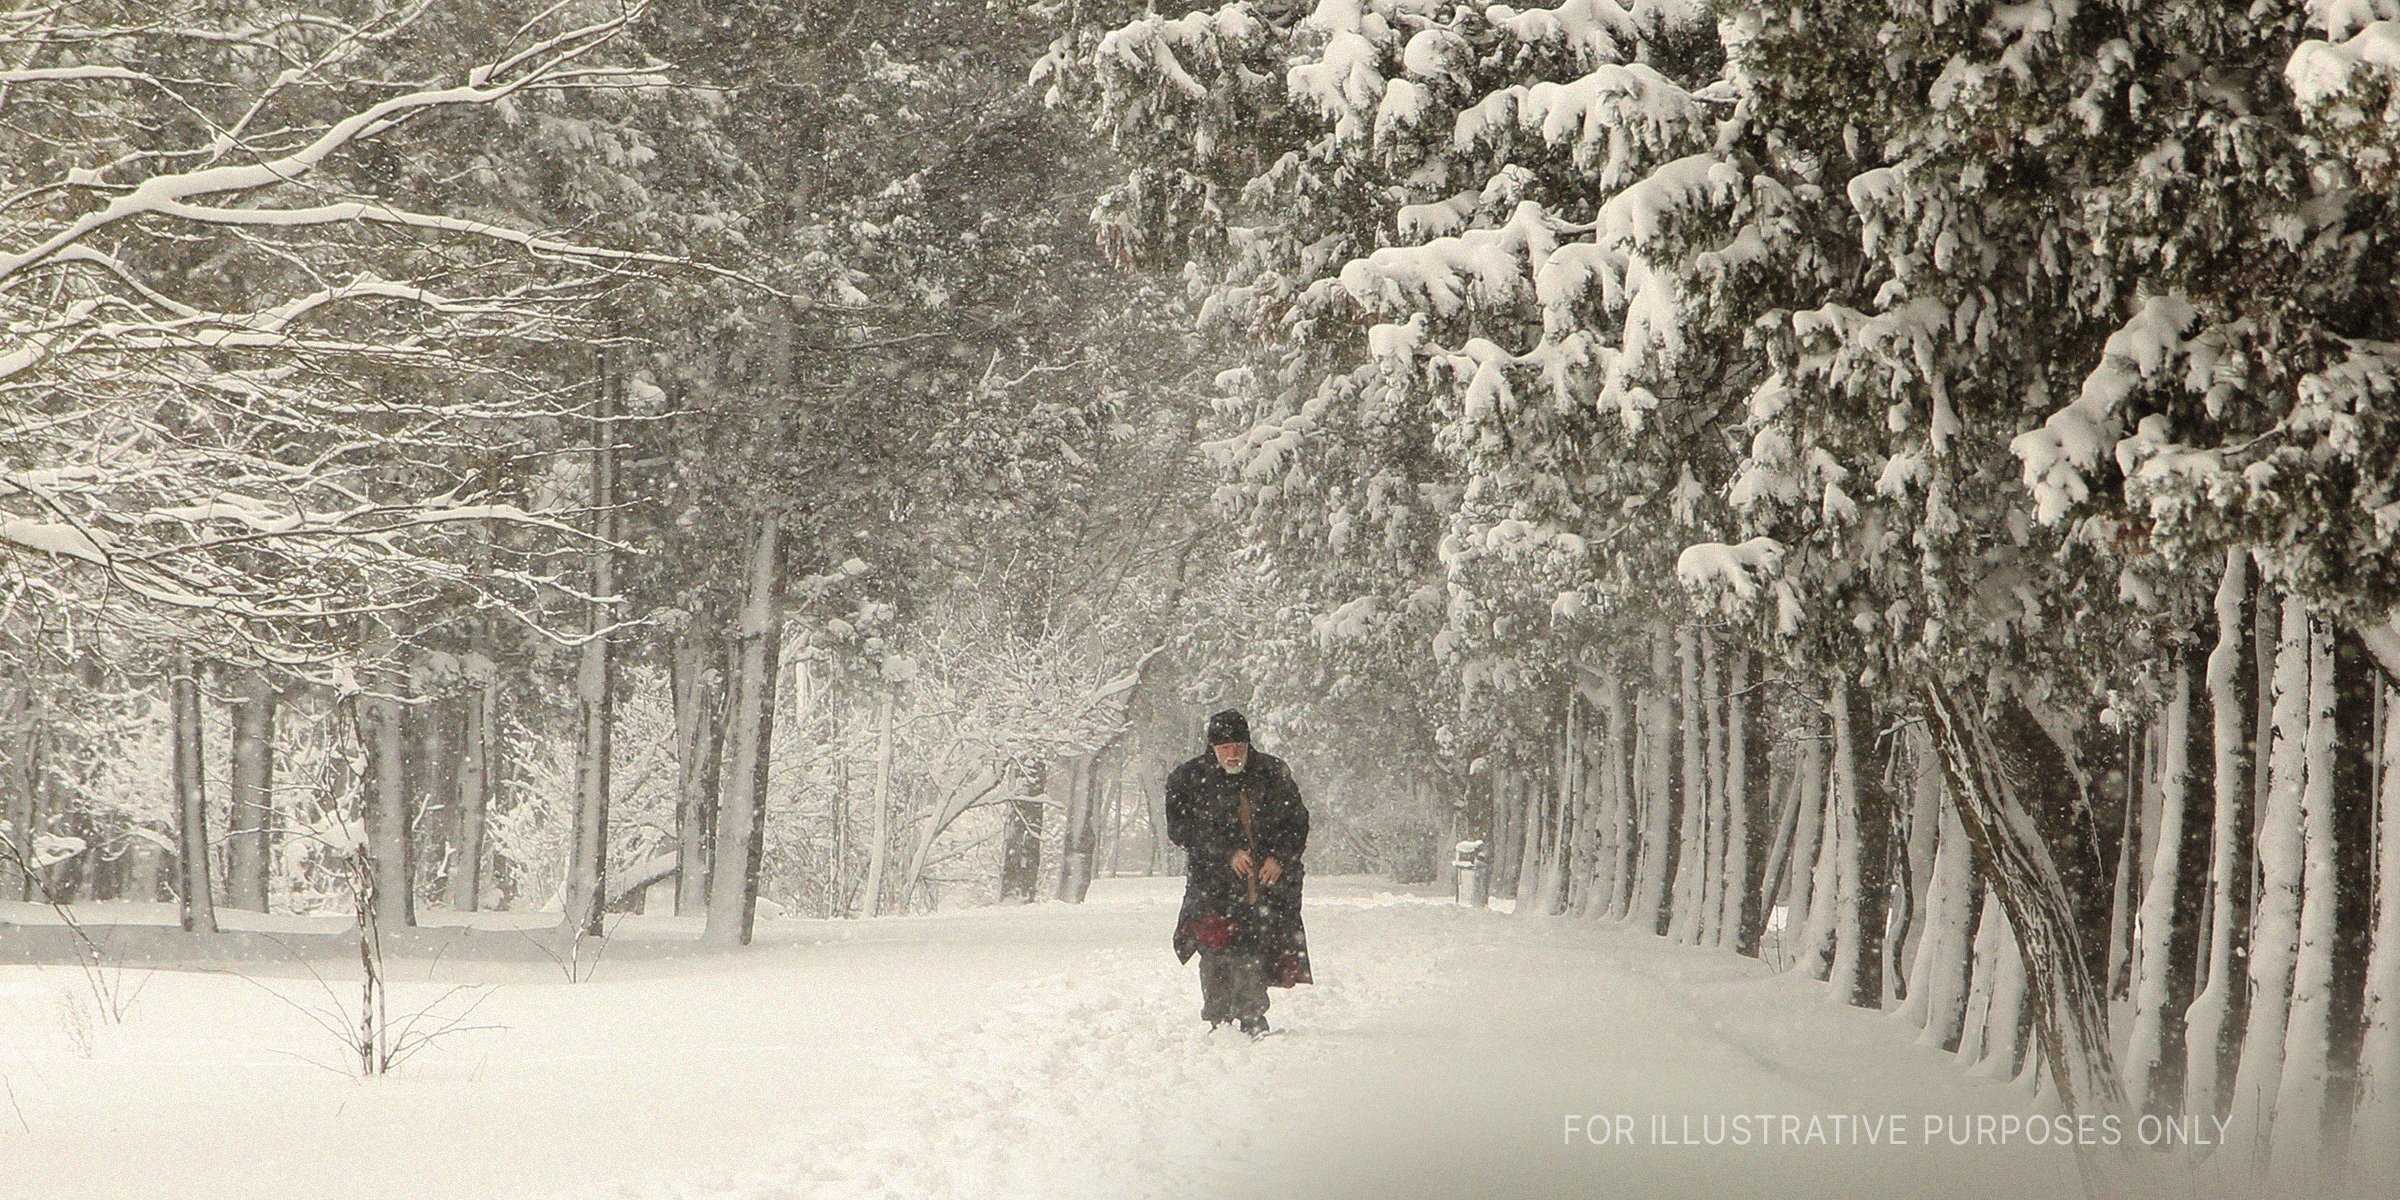 Older man walking on a snowy day | Source: Getty Images